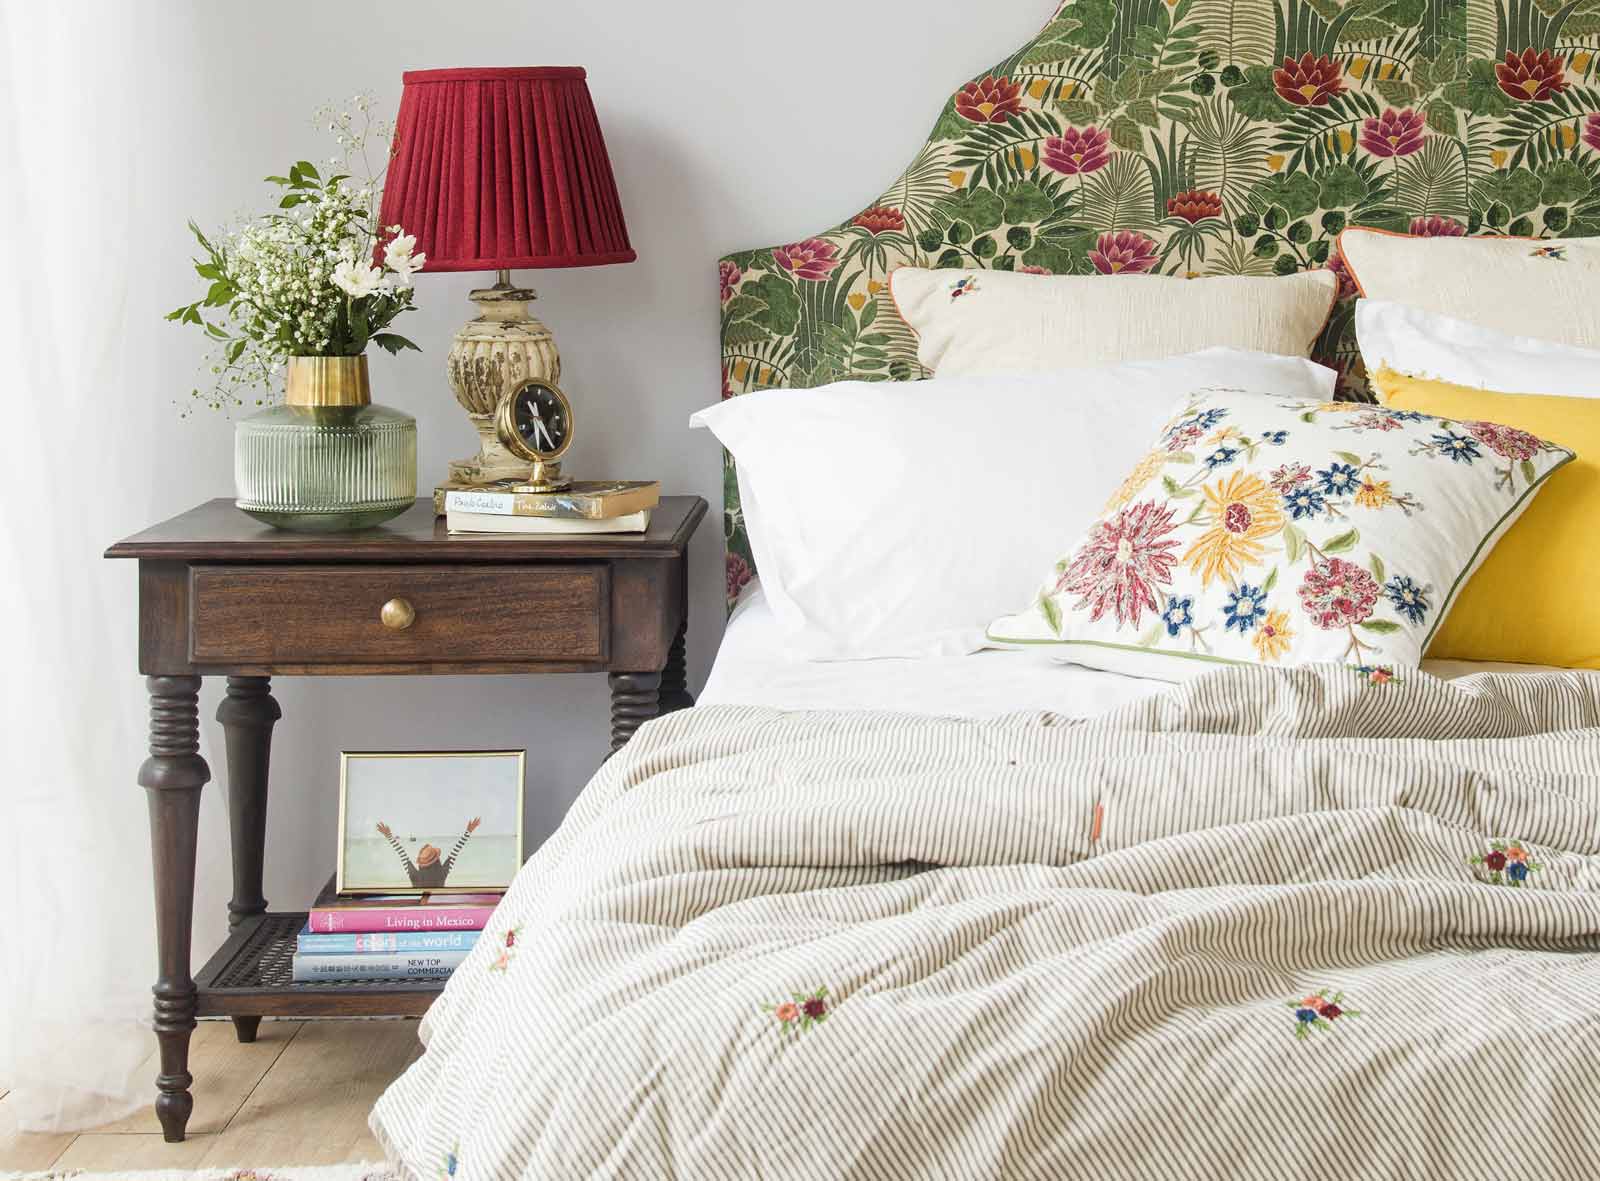 3 Ways To Switch Up Your Headboard, How To Change The Look Of A Headboard